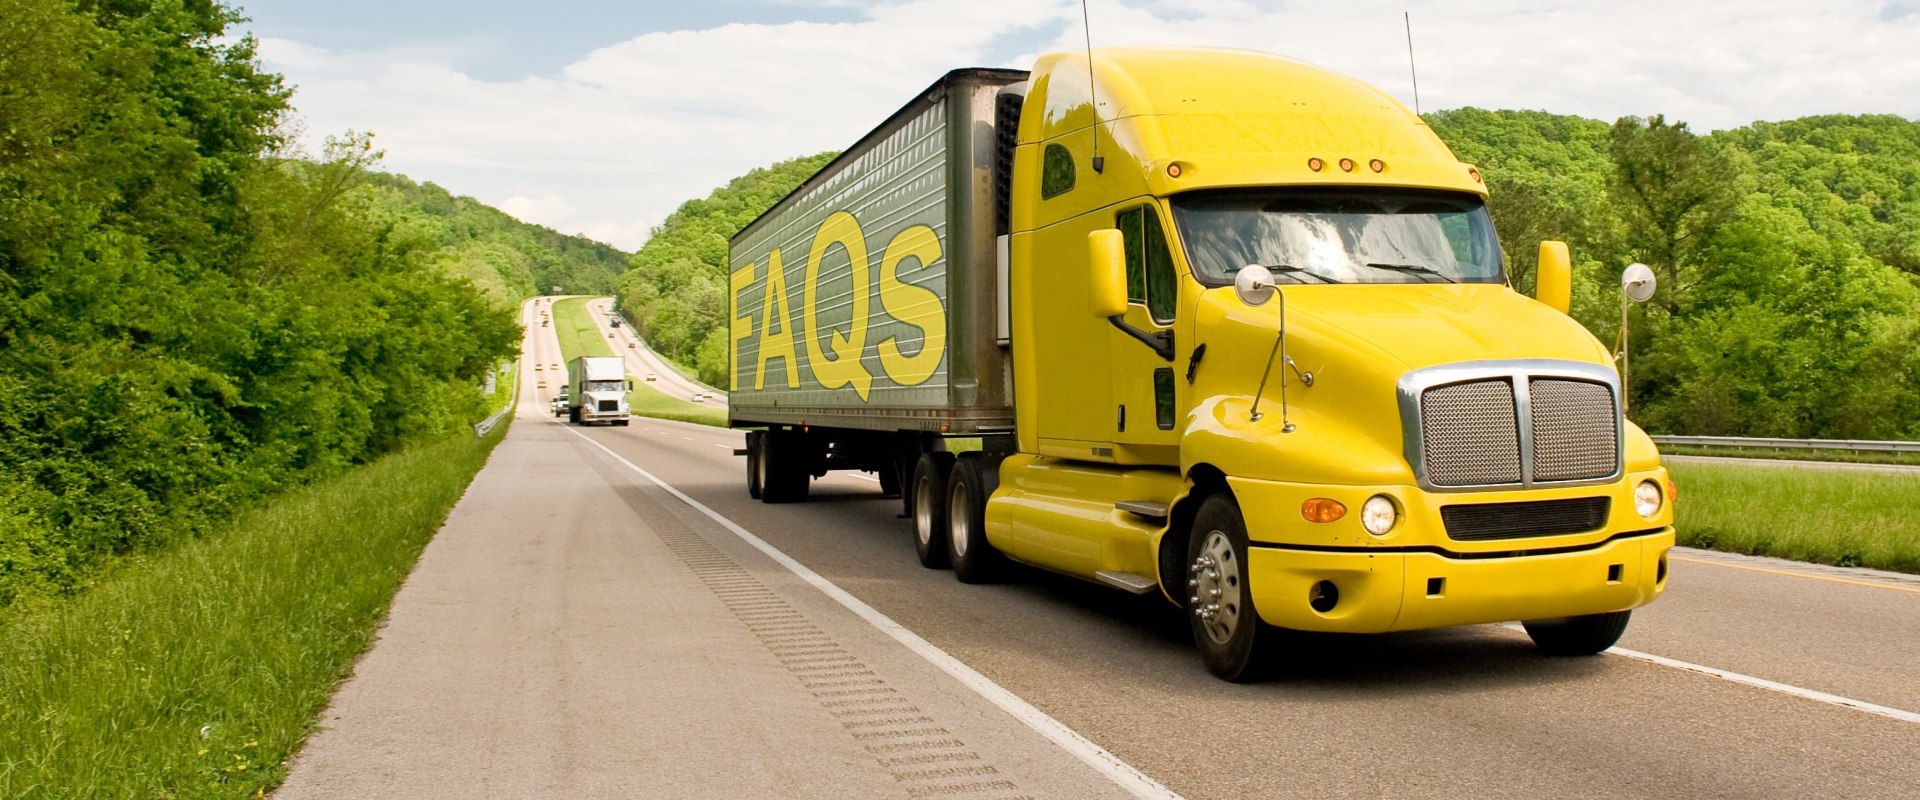 Can I Use My Smartphone to Pay for a Commercial Truck Toll?